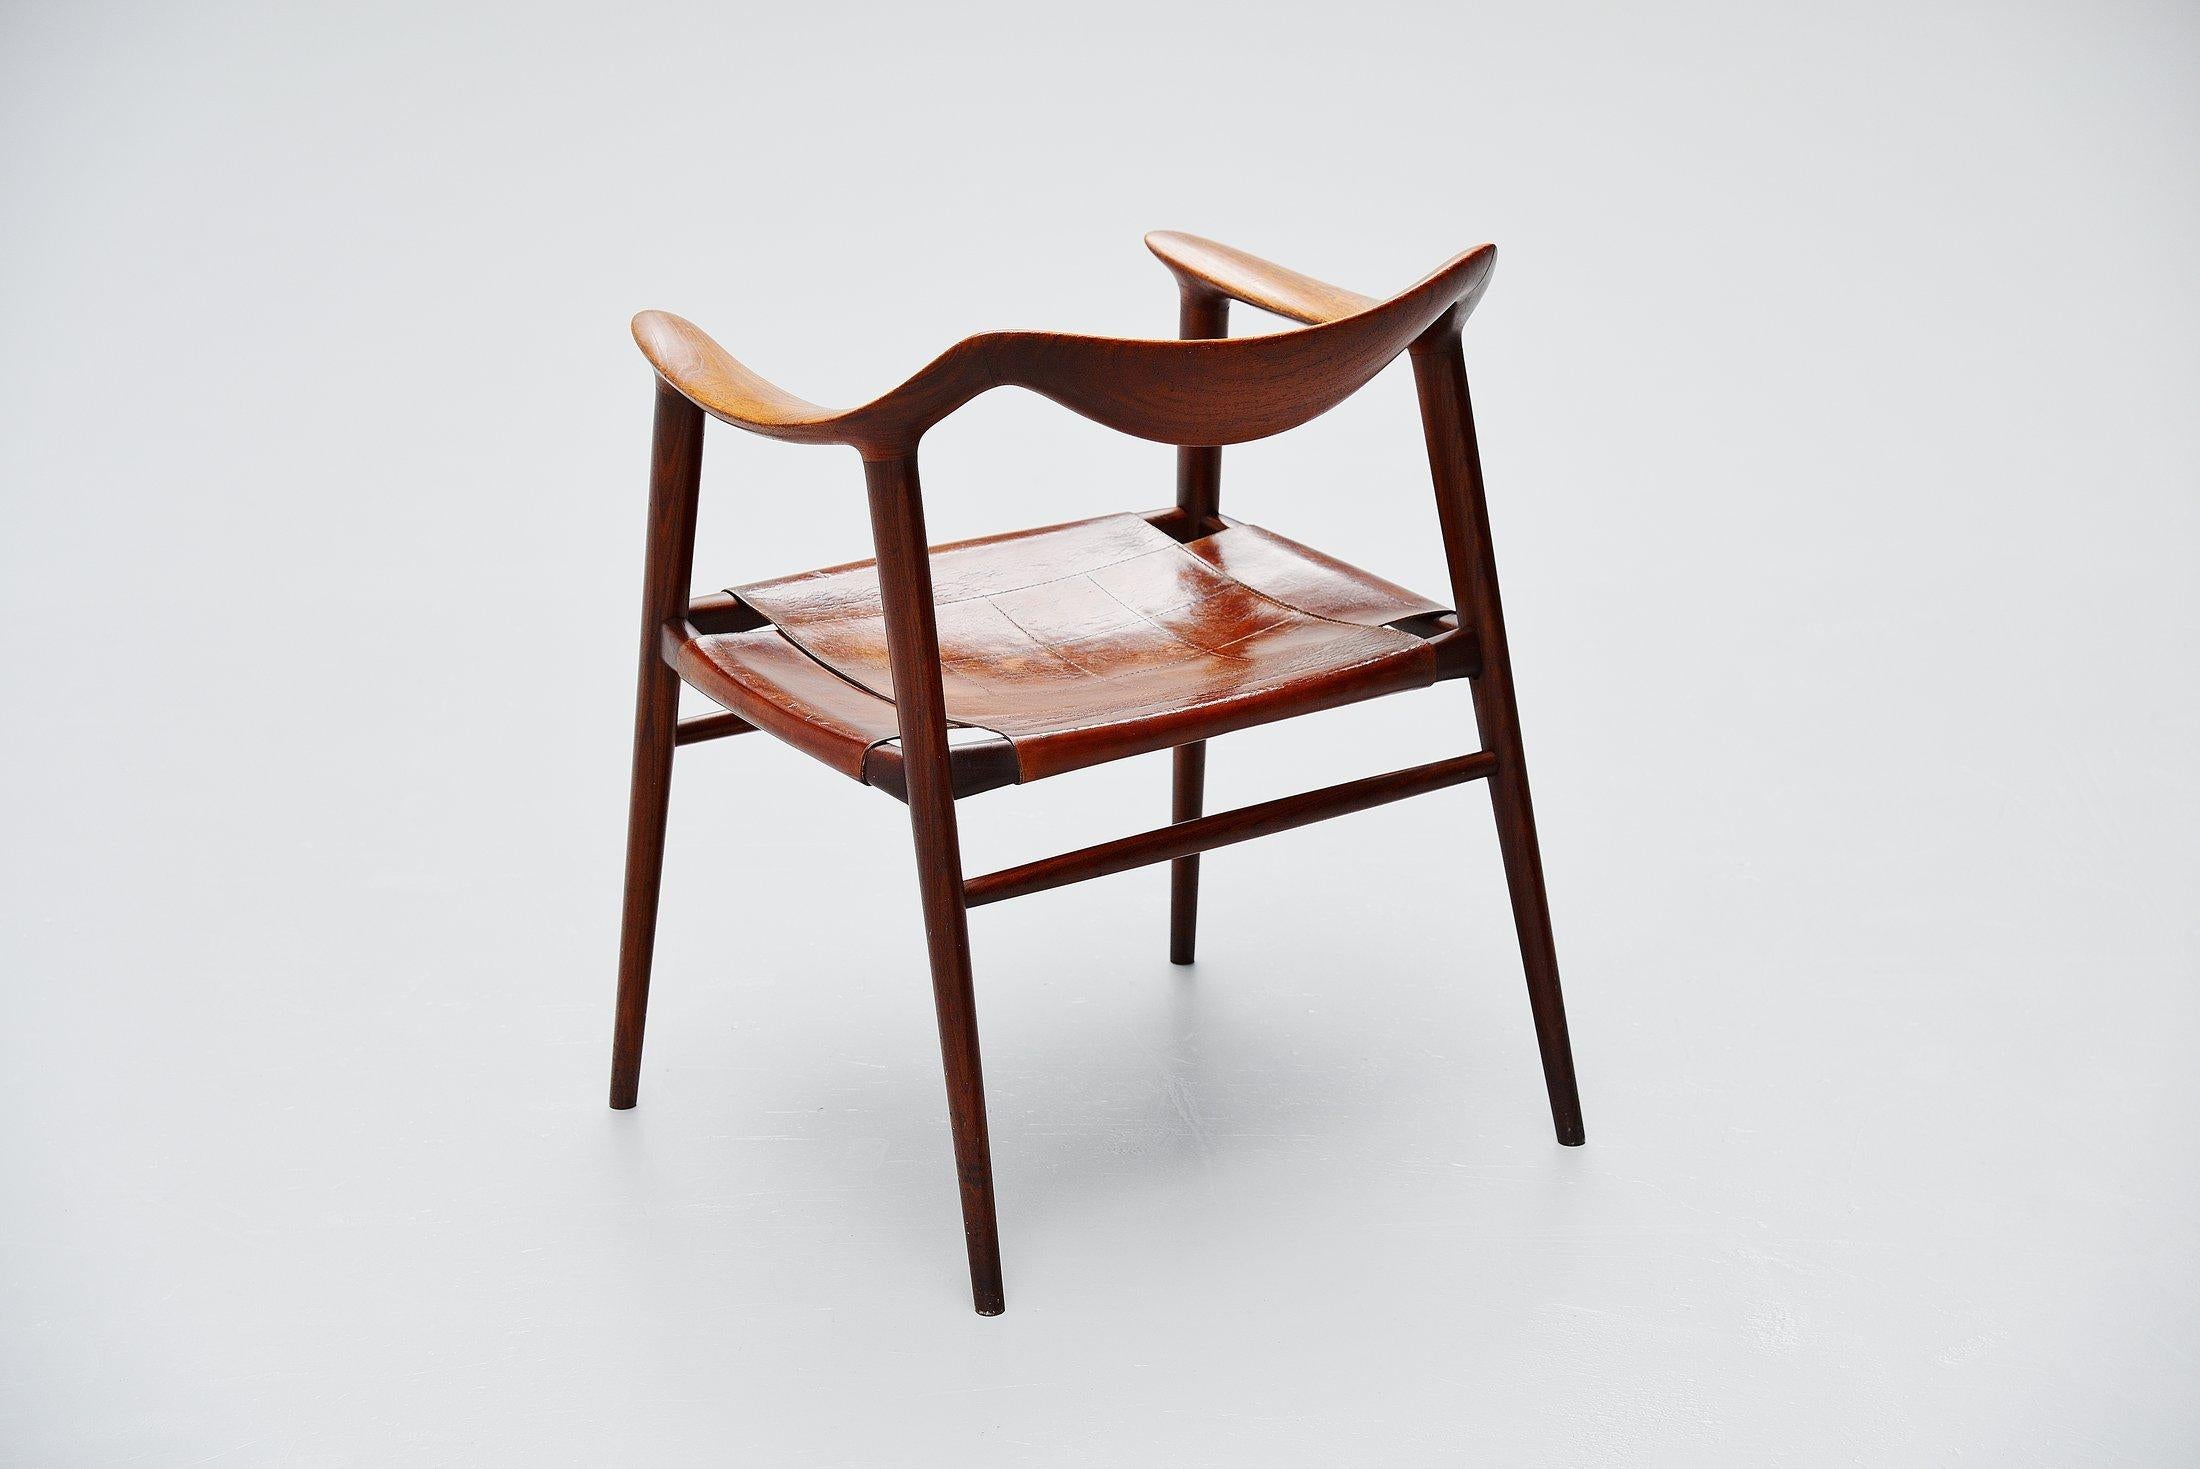 Stunning sculptural armchair designed by Rastad and Relling and manufactured by Gustav Bahus & Eft, Norway 1954. Very nicely shaped armchair so called 'Bambi'. The chair is made of solid teak wood and has a very nice leather stitched seat with